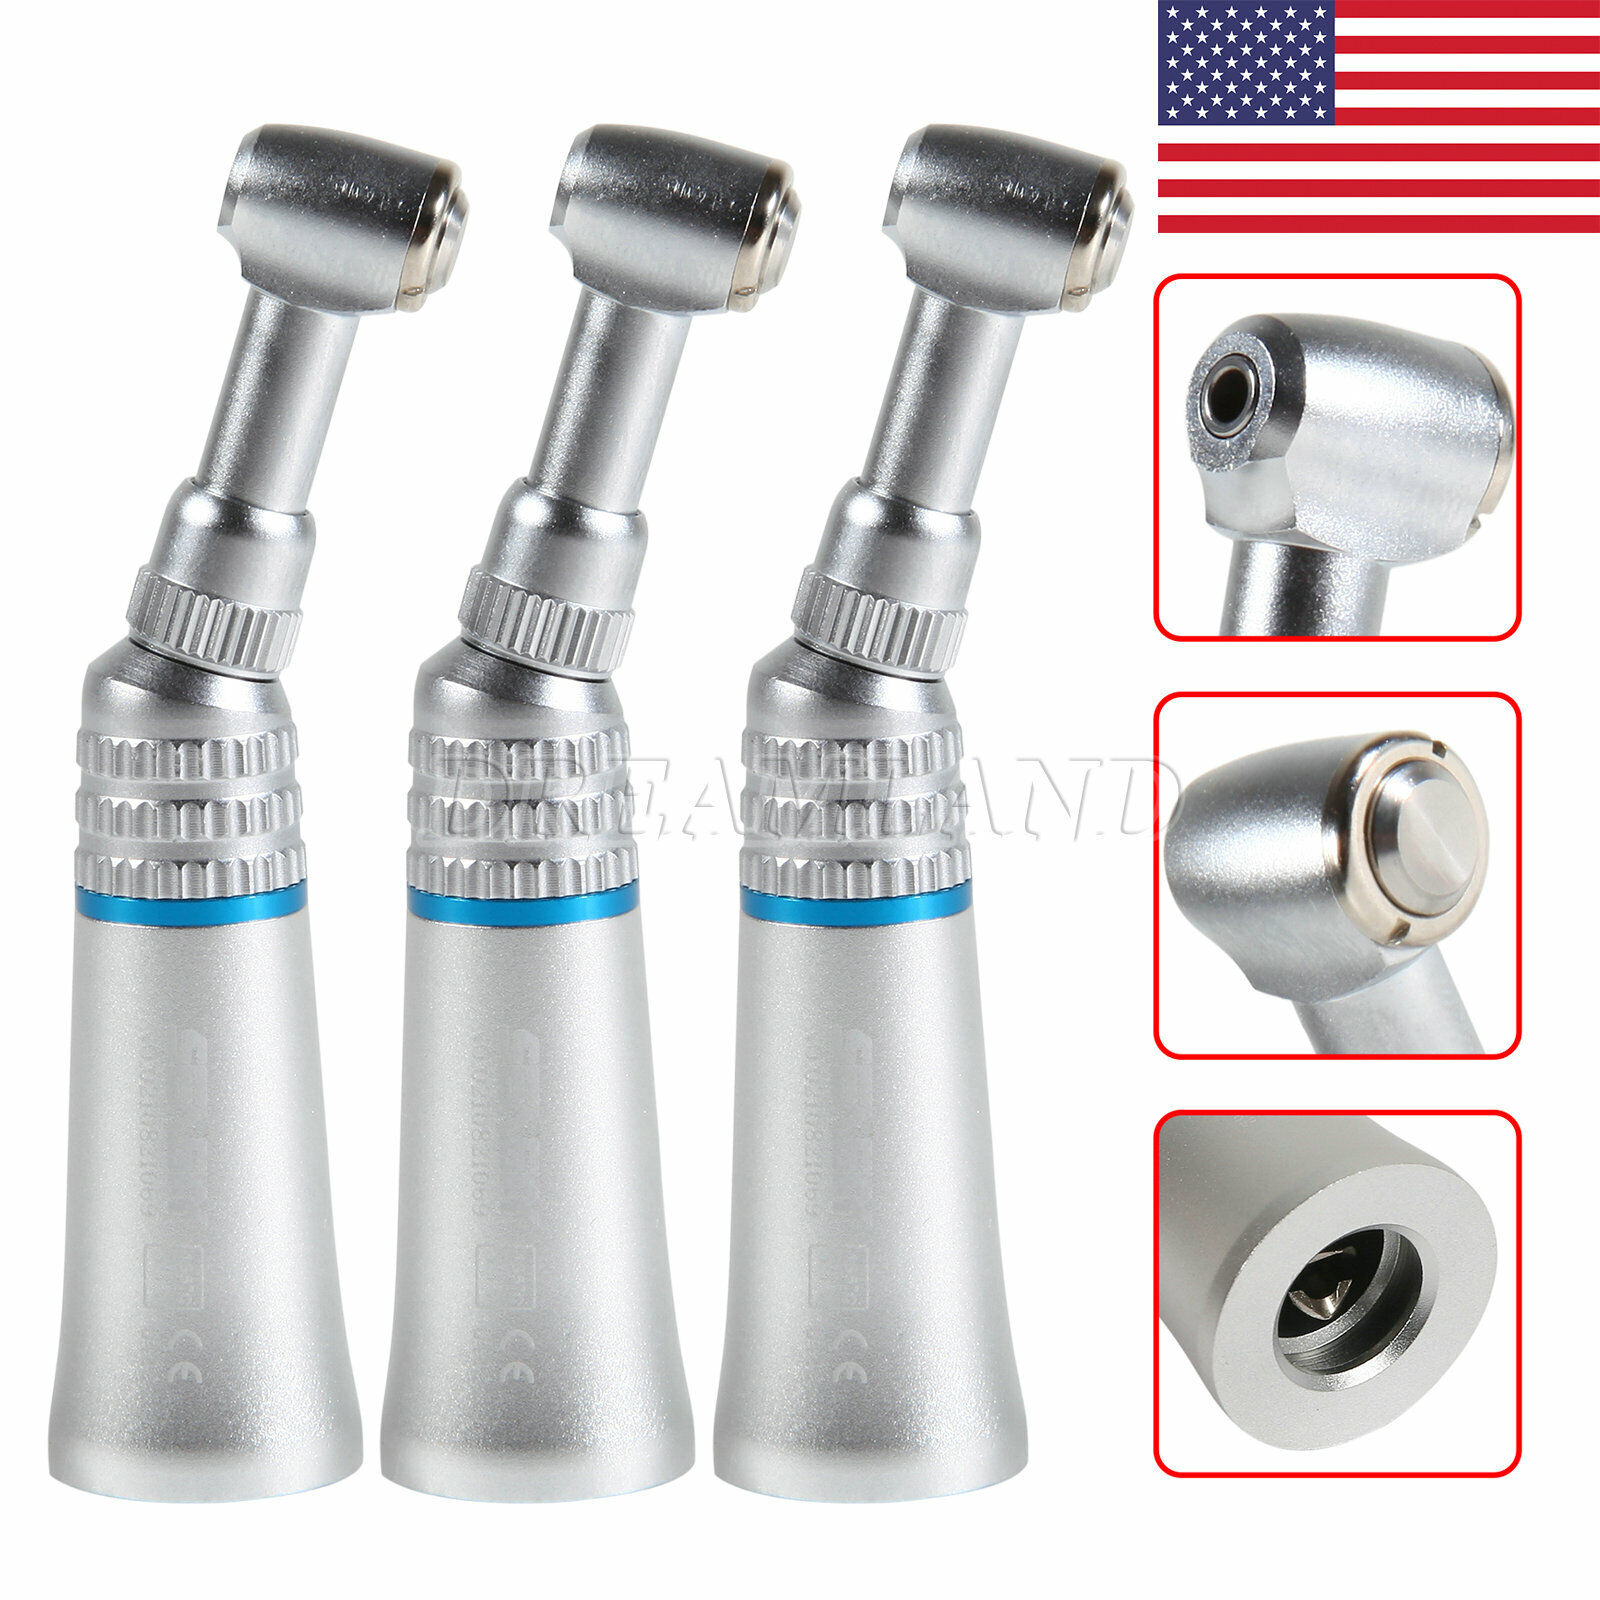 3 USA NSK style Dental Contra Angle Slow Low Speed Handpiece Push =S+